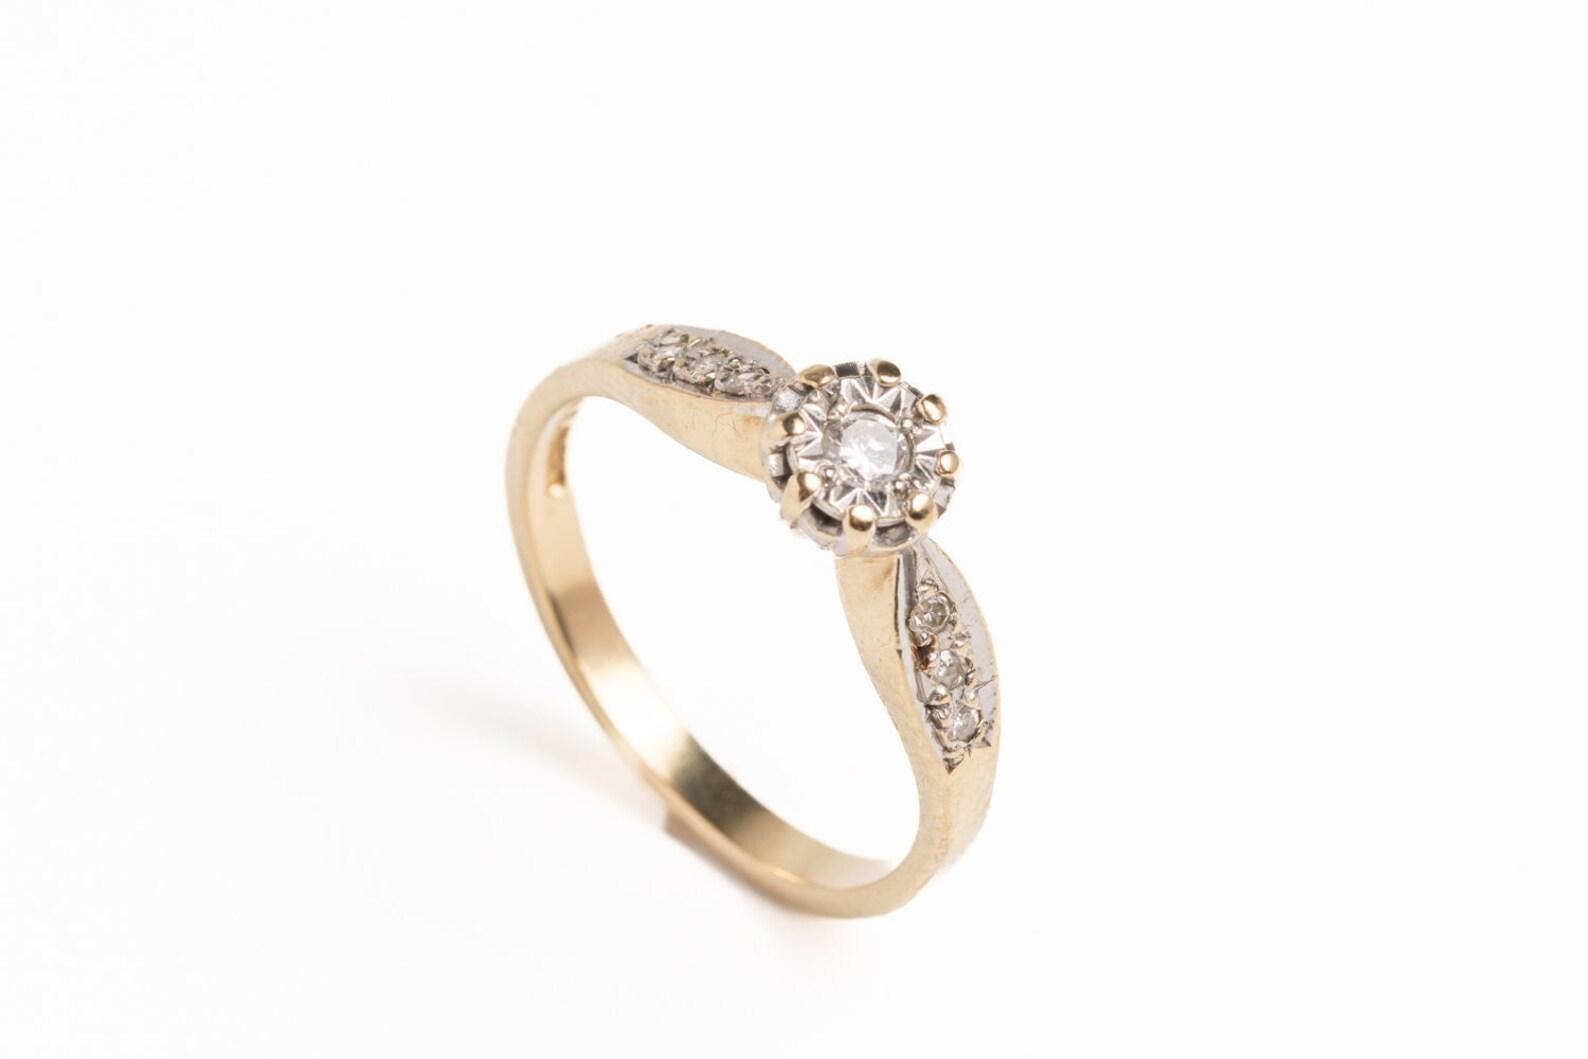 A Vintage 9ct yellow gold diamond solitaire ring with a central diamond in claw setting and shoulders decorated with six small diamonds ( three on each shoulder). The ring is boxed and carries hallmarks for Sheffield along with the '375' 9ct gold